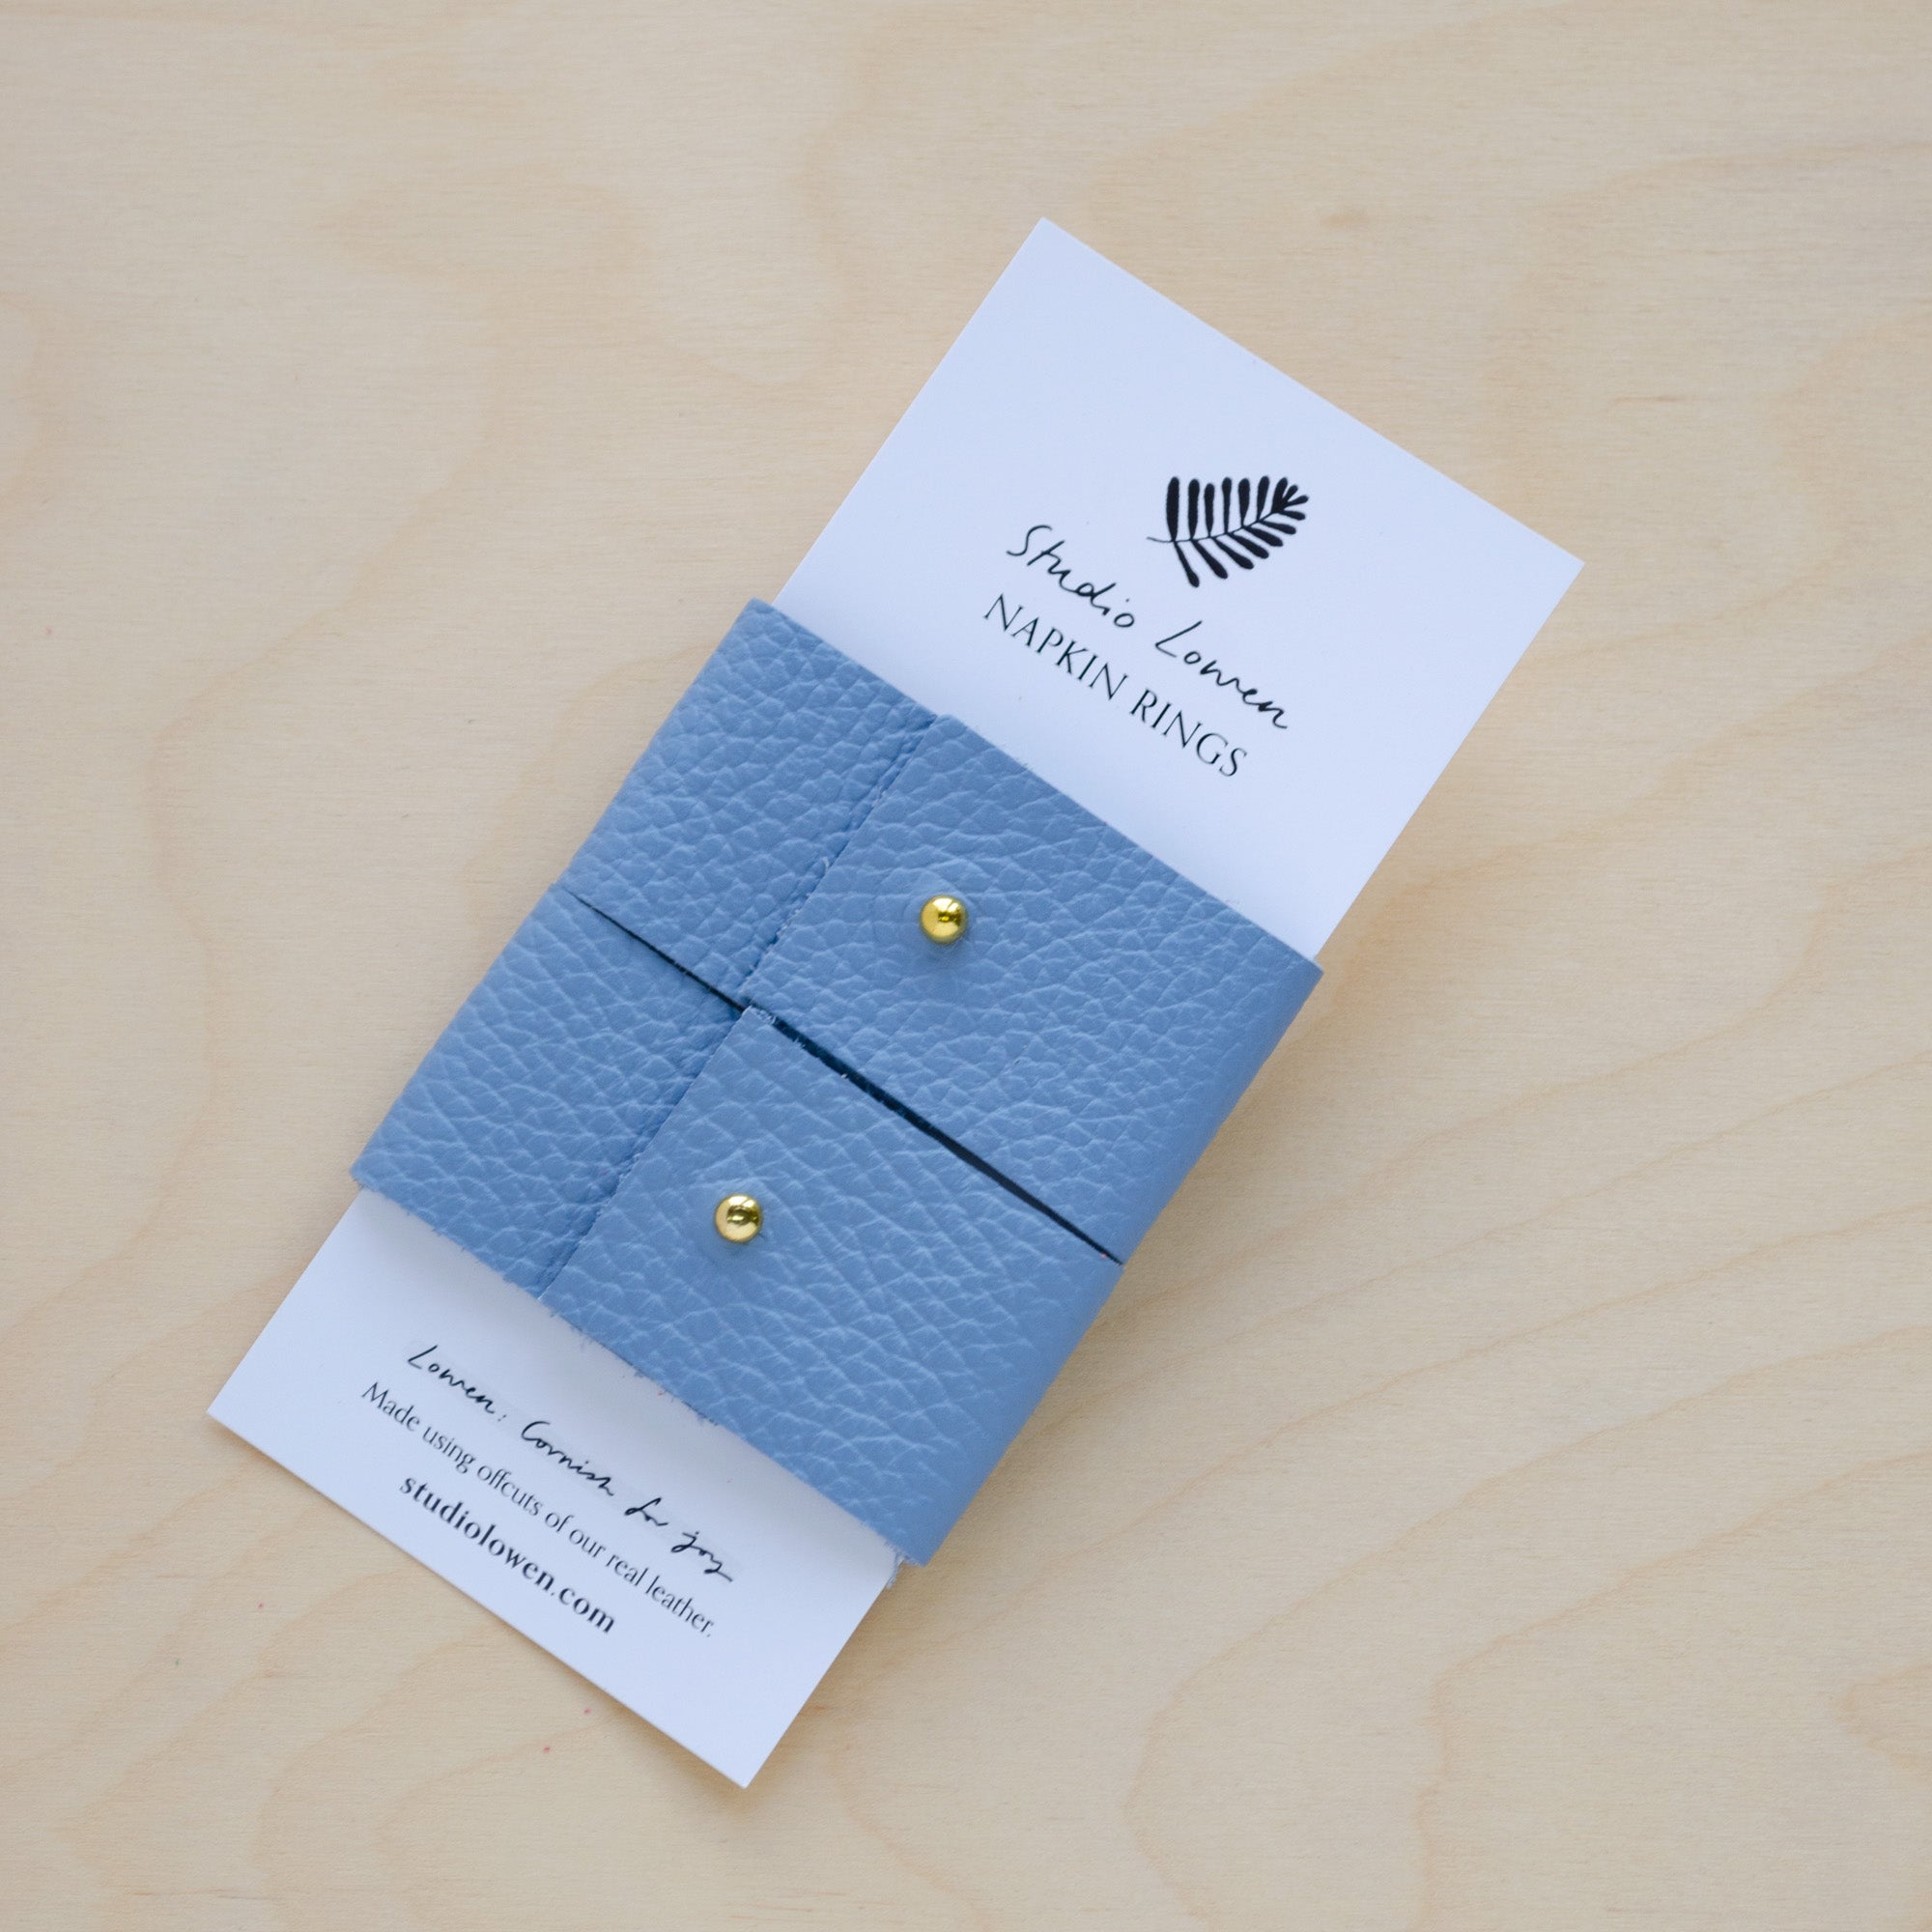 Pair of soft Periwinkle blue leather napkin rings with a gold stud on a white card packaging.